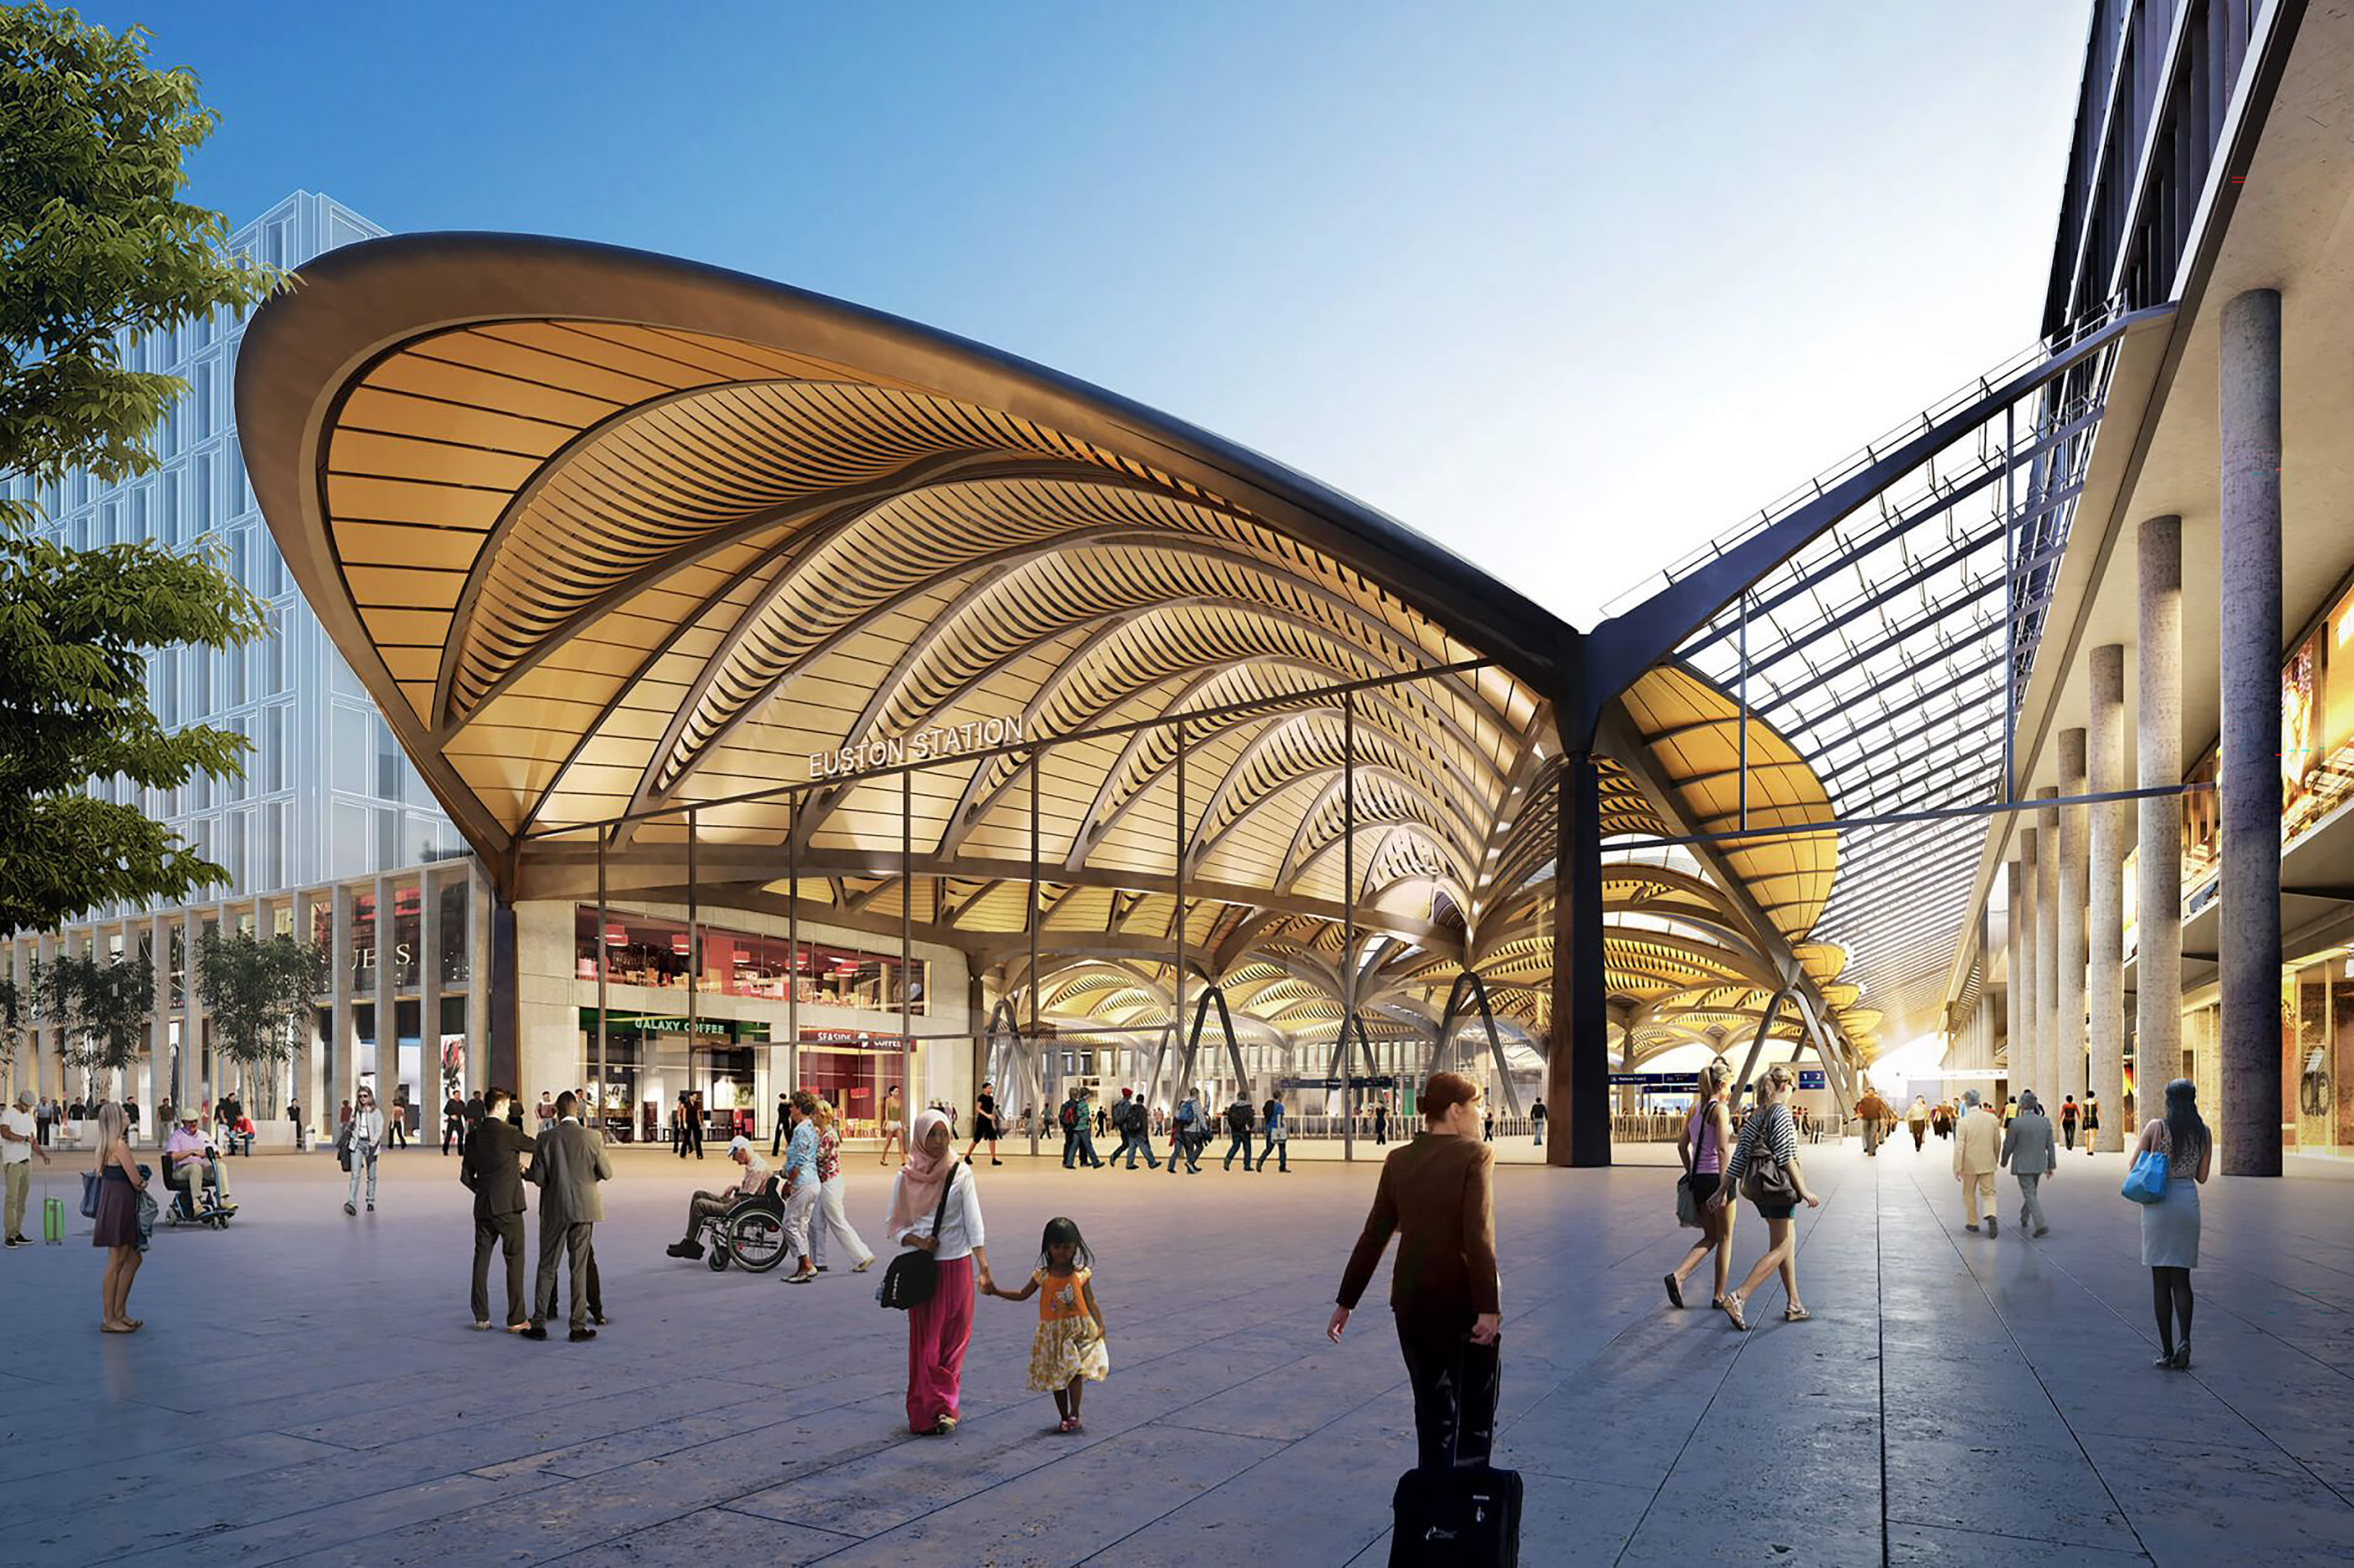 Mitsubishi Electric’s automation equipment is helping London Euston train station futureproof its traction power infrastructure as part of the High Speed Two (HS2) railway line project [Source: Sella Controls]